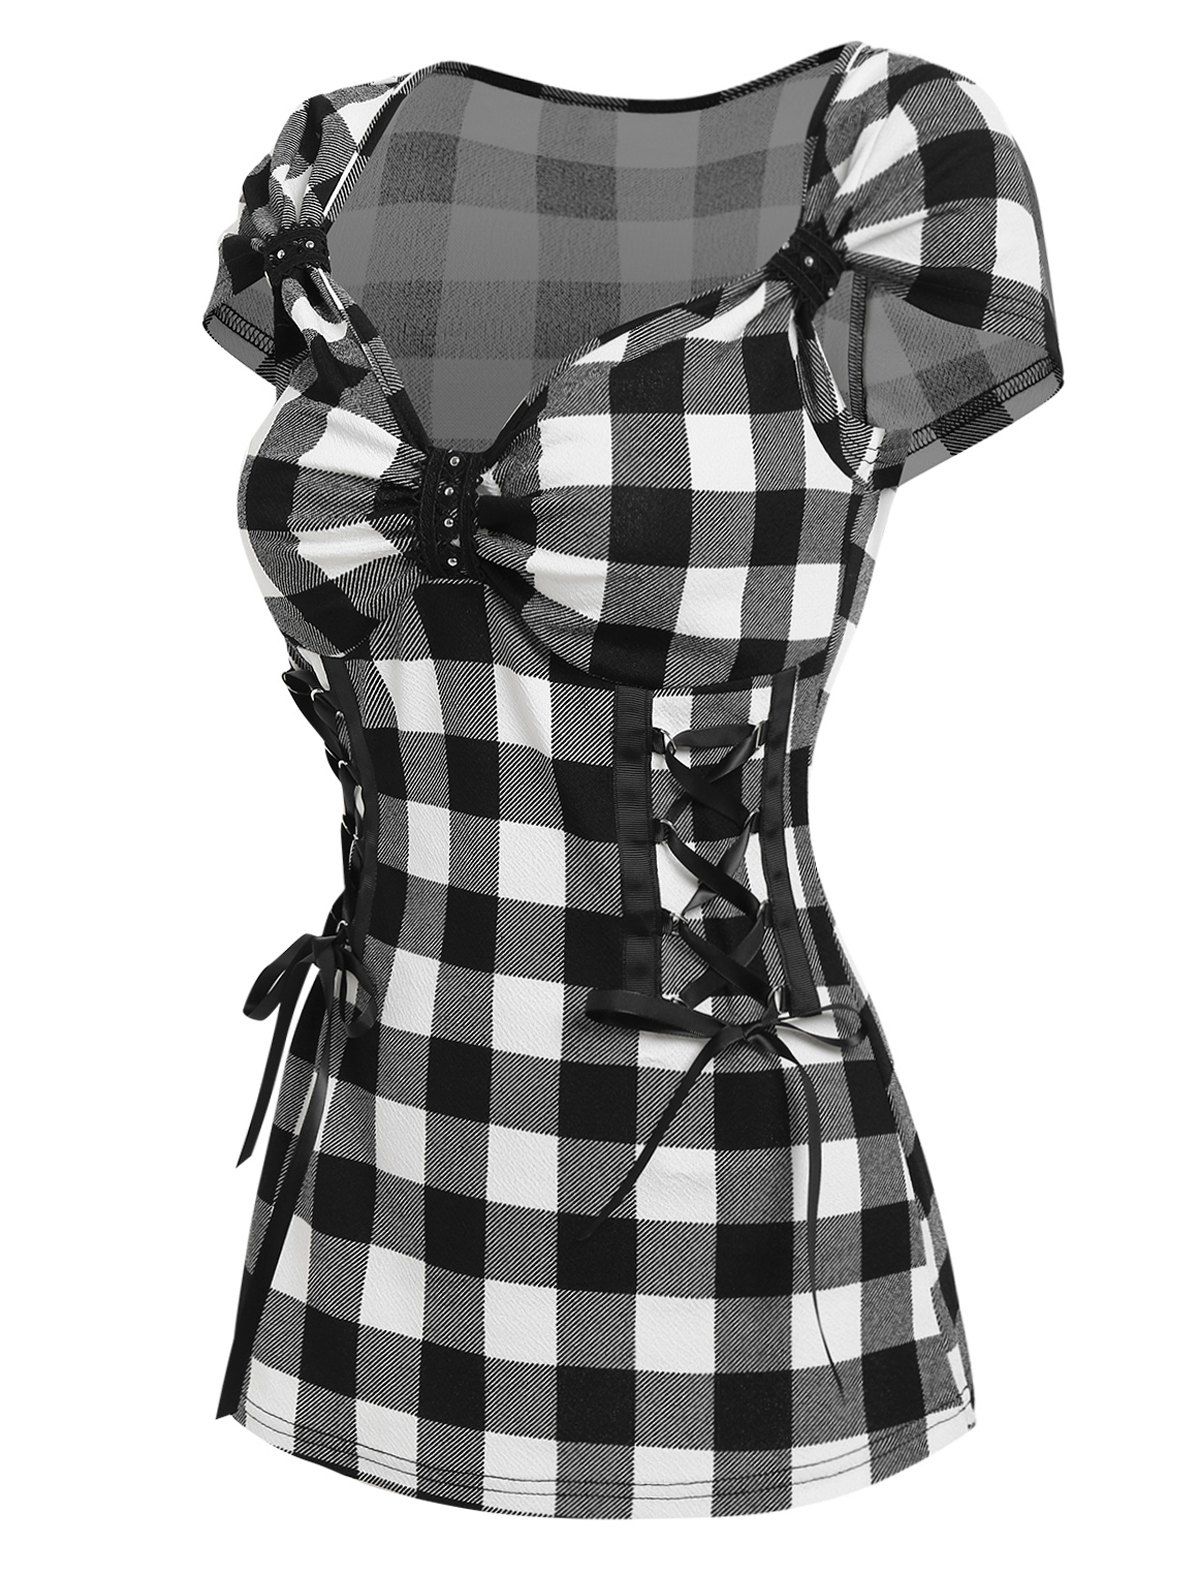 Corset Lace Up T Shirt Sweetheart Neck Plaid Checkerboard Tee - BLACK L